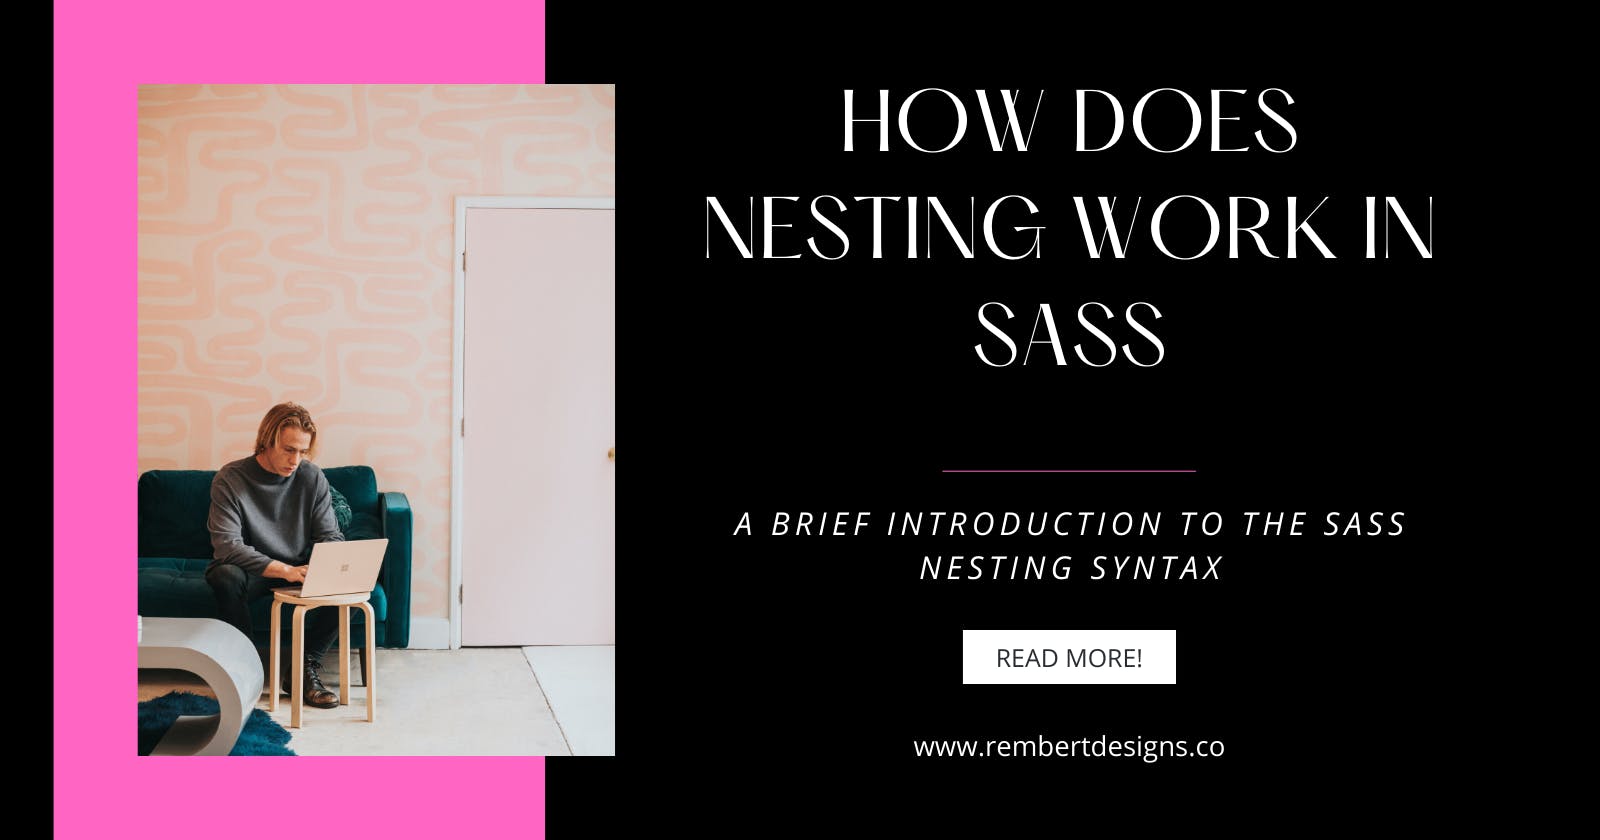 How Does Nesting Work in SASS